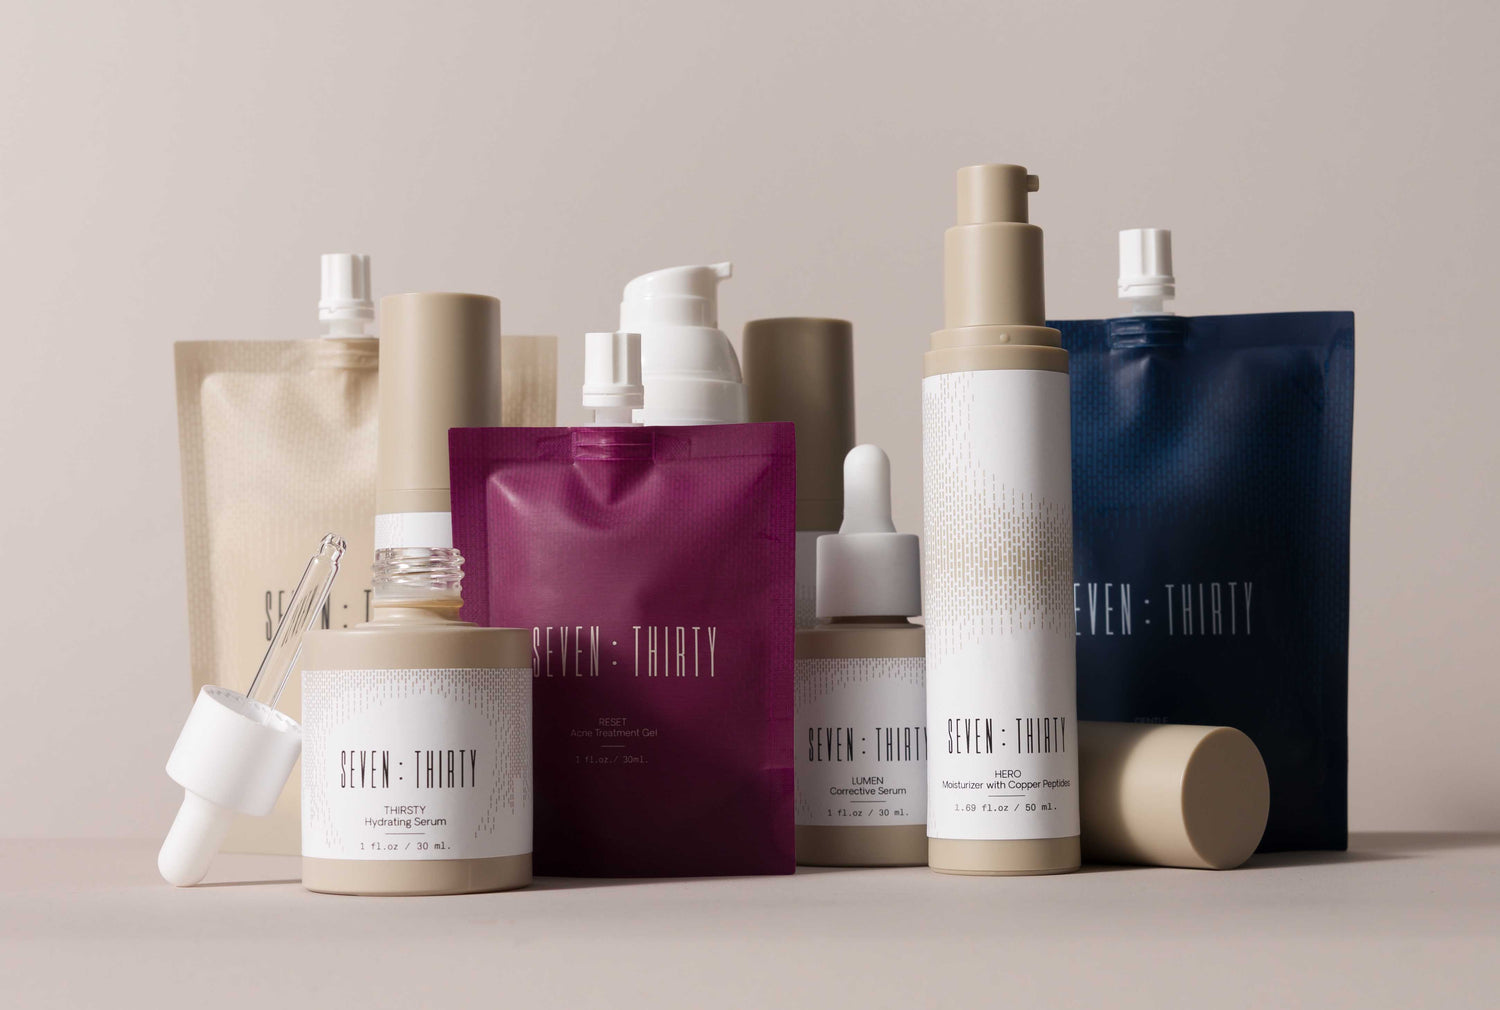 The full skincare line of products from Seven:Thirty arranged on a khaki background